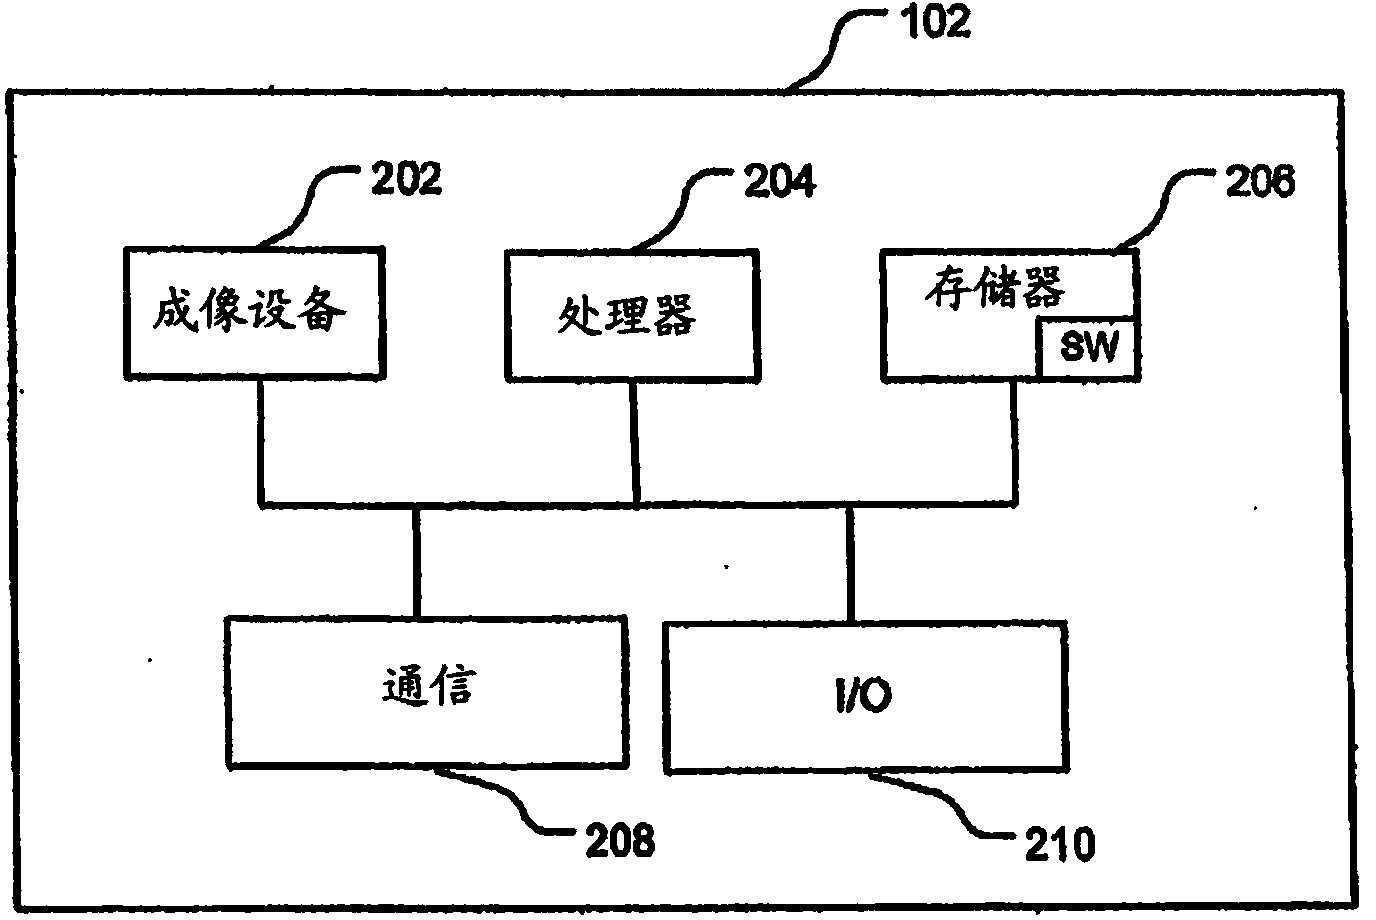 Method and system for video coding with noise filtering of foreground object segmentation